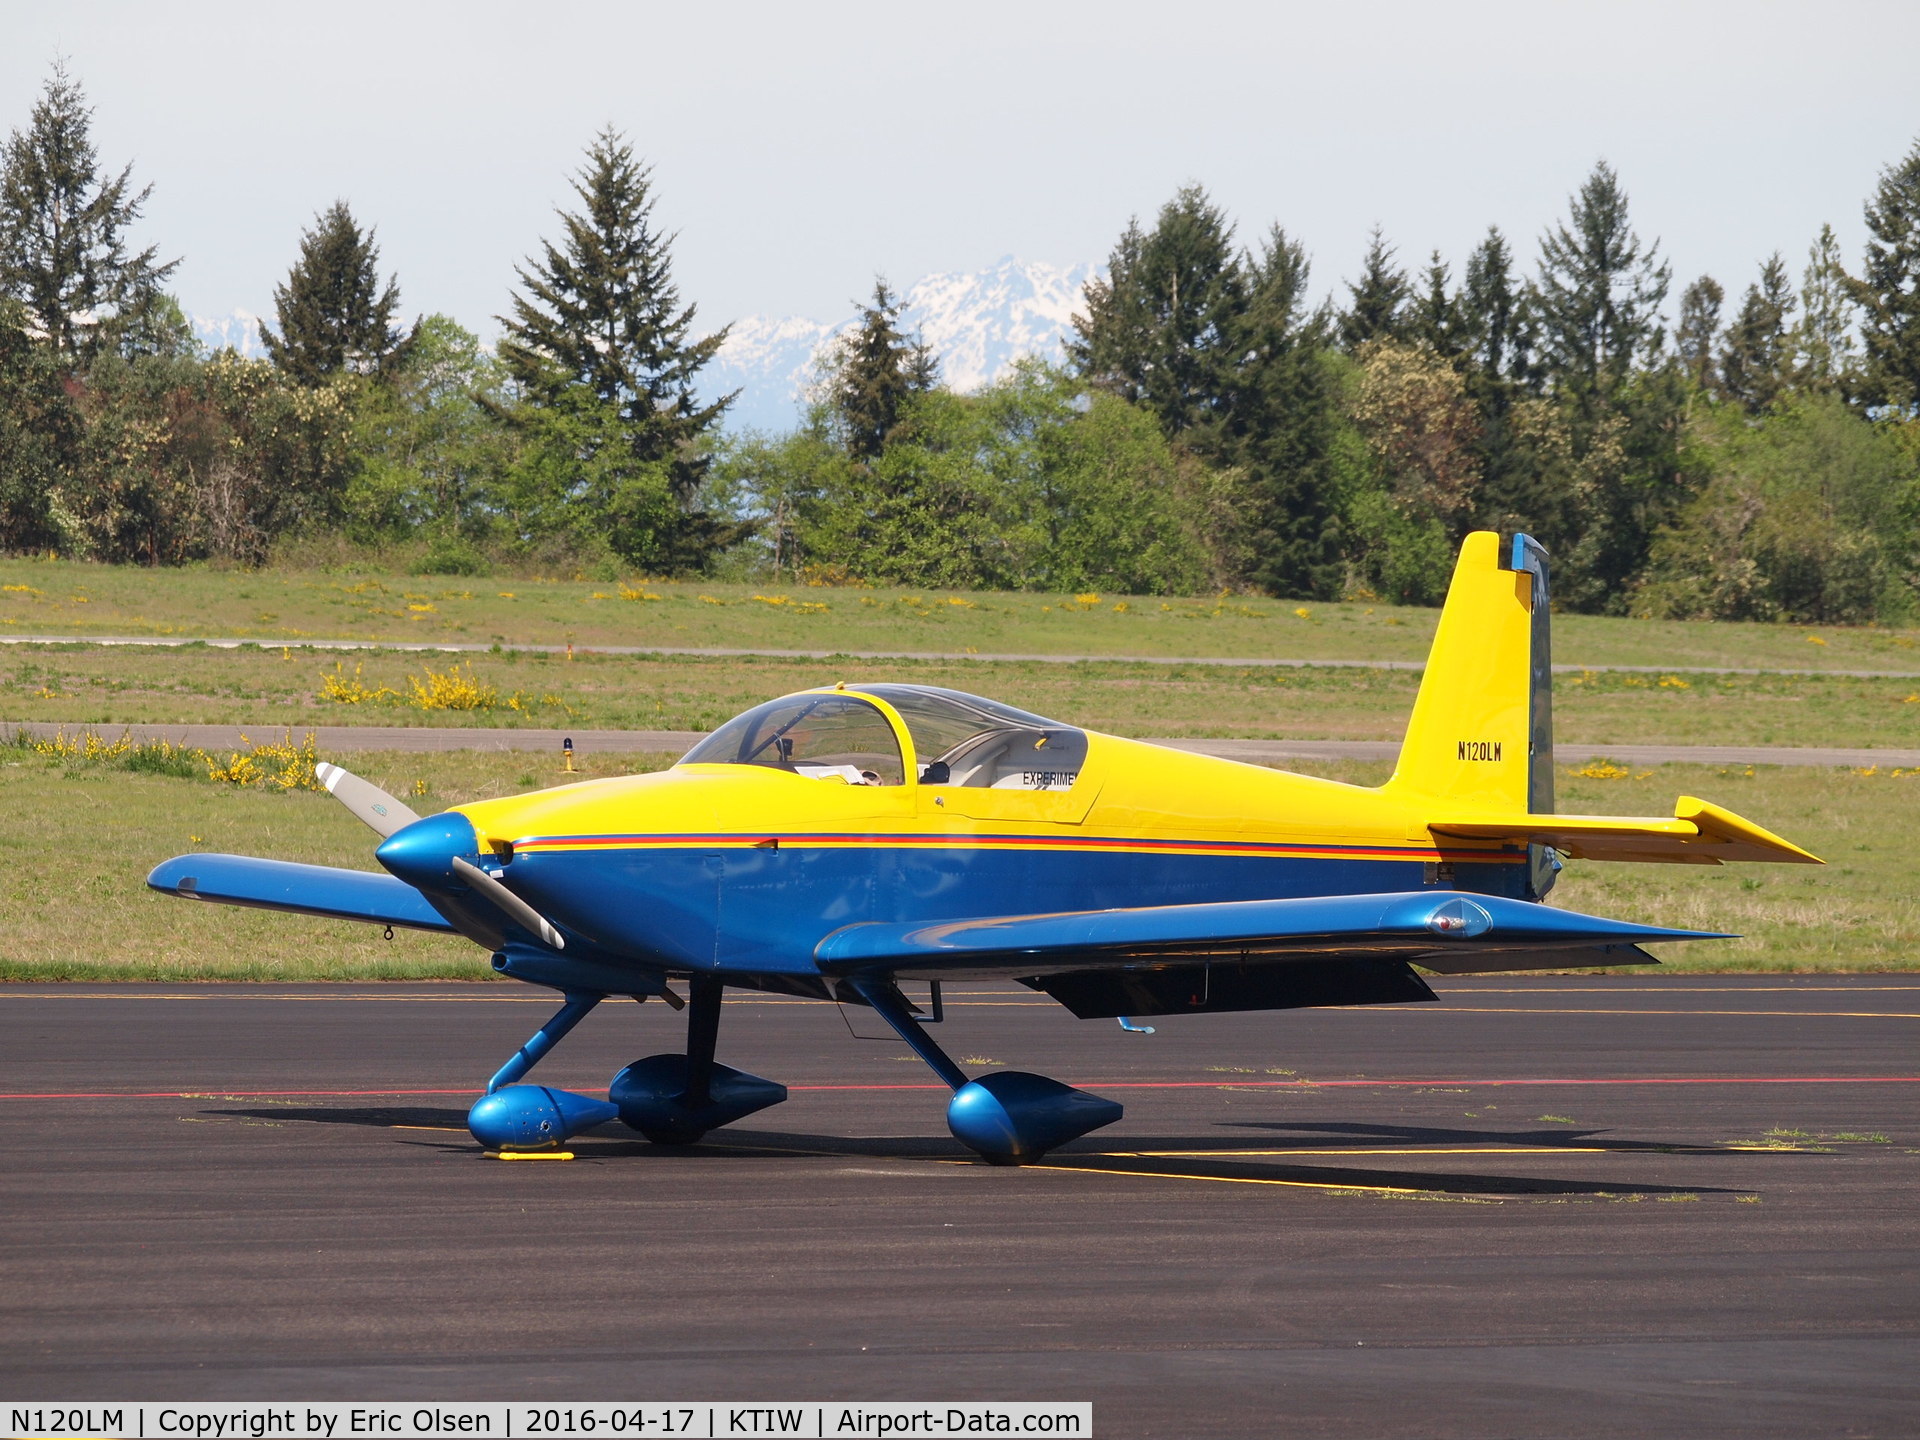 N120LM, 2003 Vans RV-9A C/N 90120, RV-9A at the Tacoma Narrows Airport with the Olympic Mnts in the background.